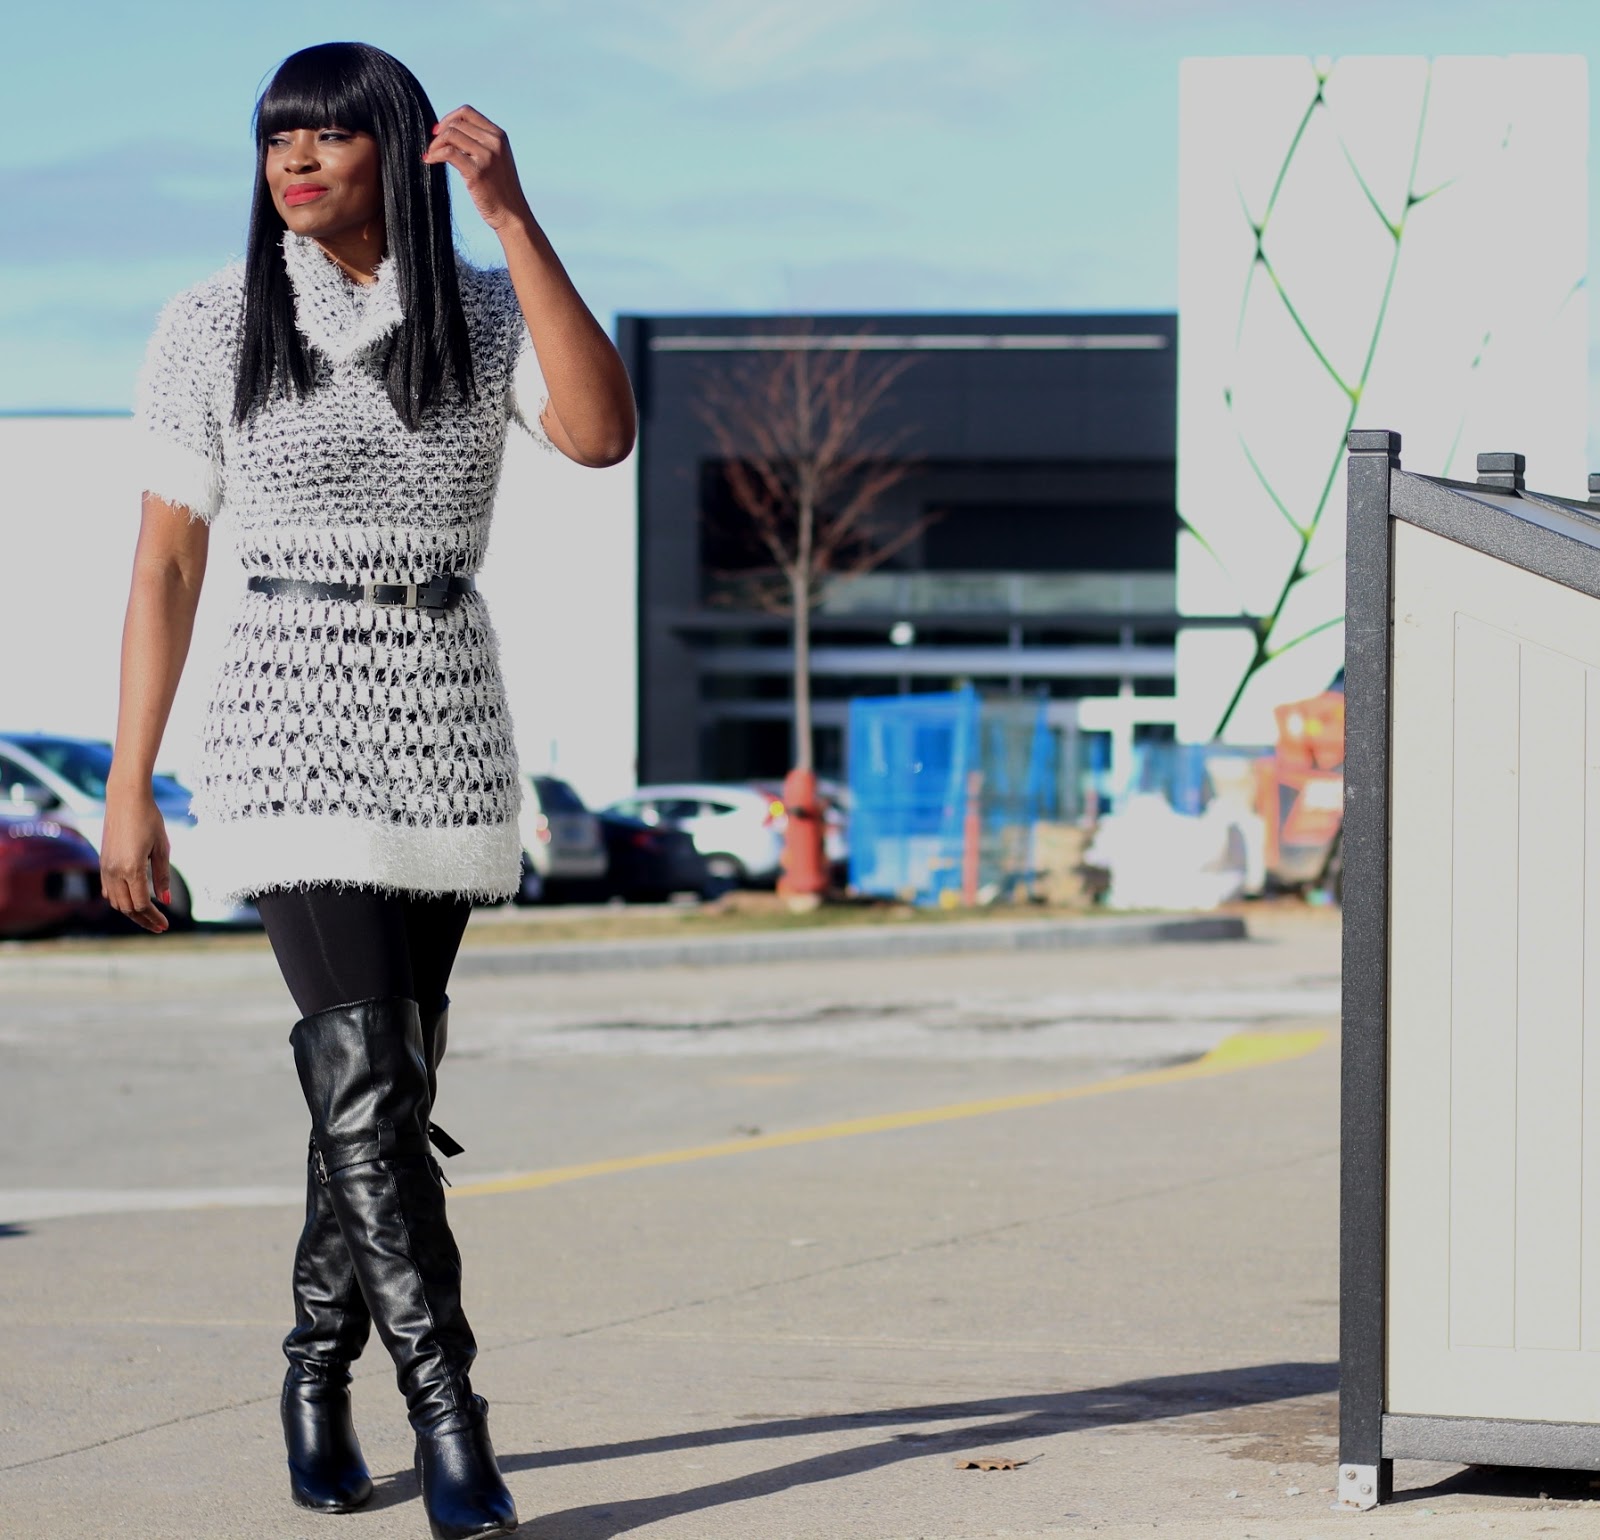 what to wear in winter from day to night in winter: sweater dress + leggings + over-the-knee boots